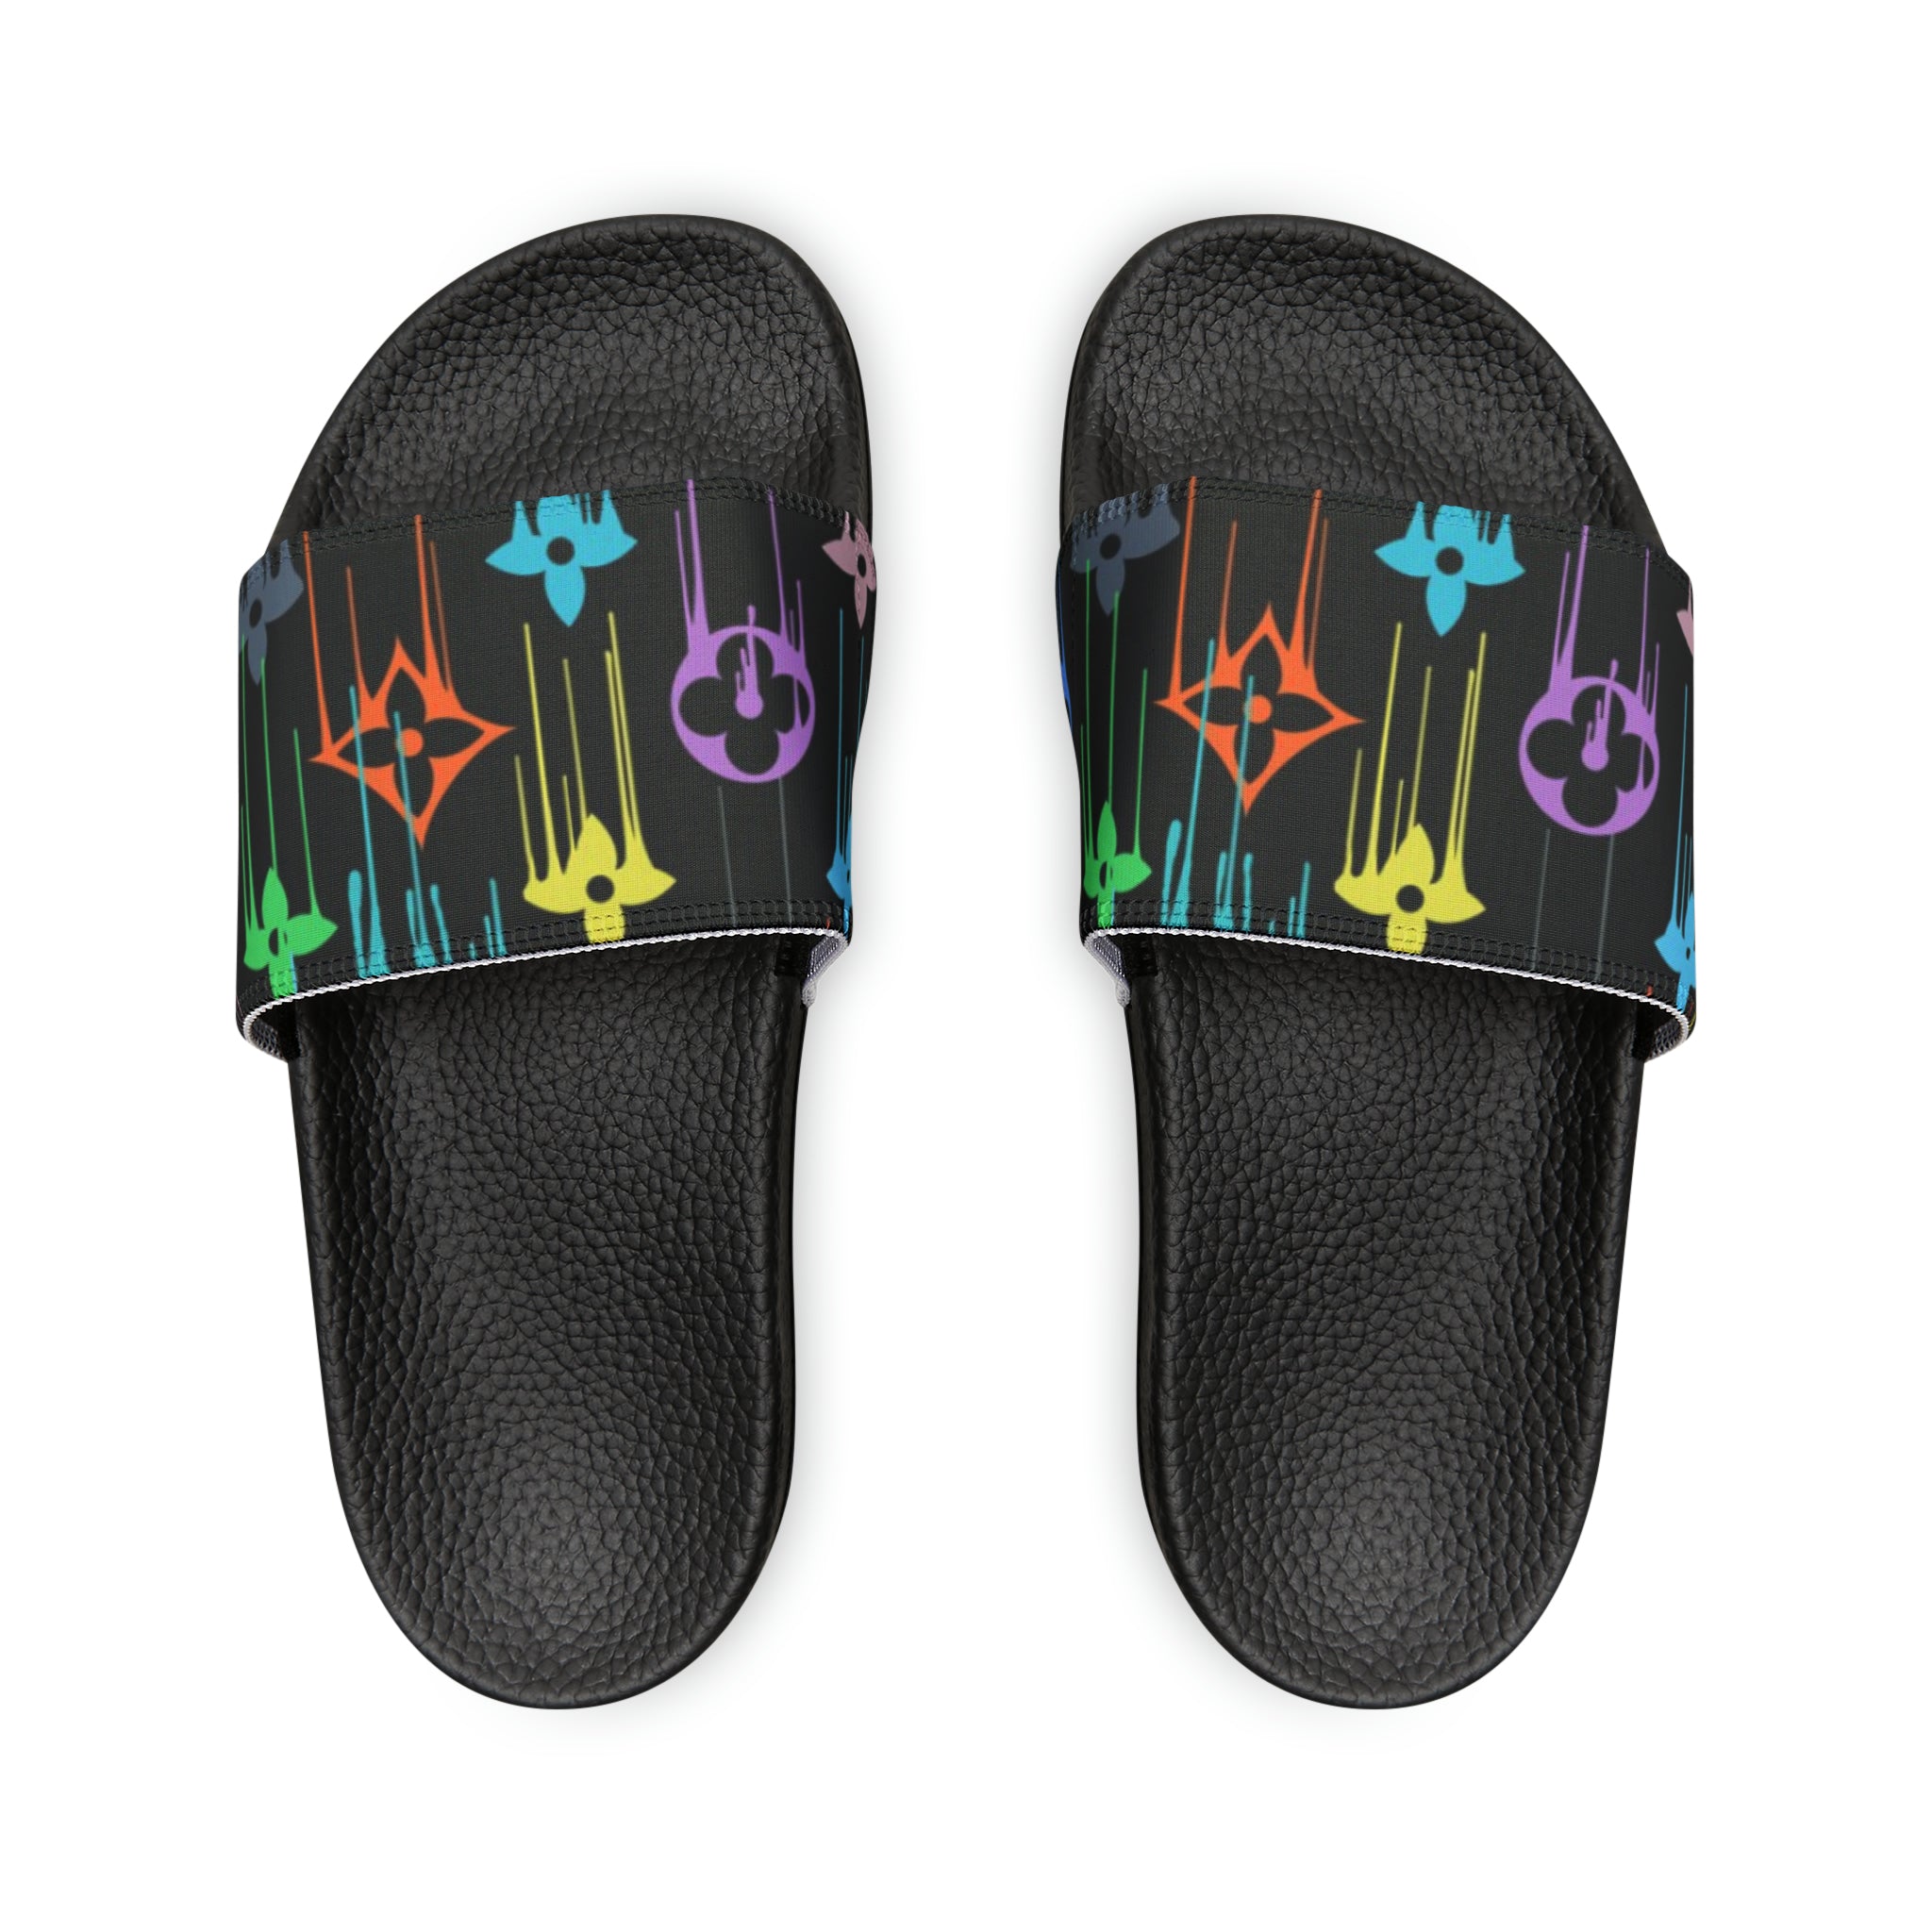 Children's Wear Collection in Multi-Colour Drip Icons Slide Sandals Youth PU Slide Sandals, Kids Sandals, Children Summer Slides Kids Sandals Black-US-5 The Middle Aged Groove